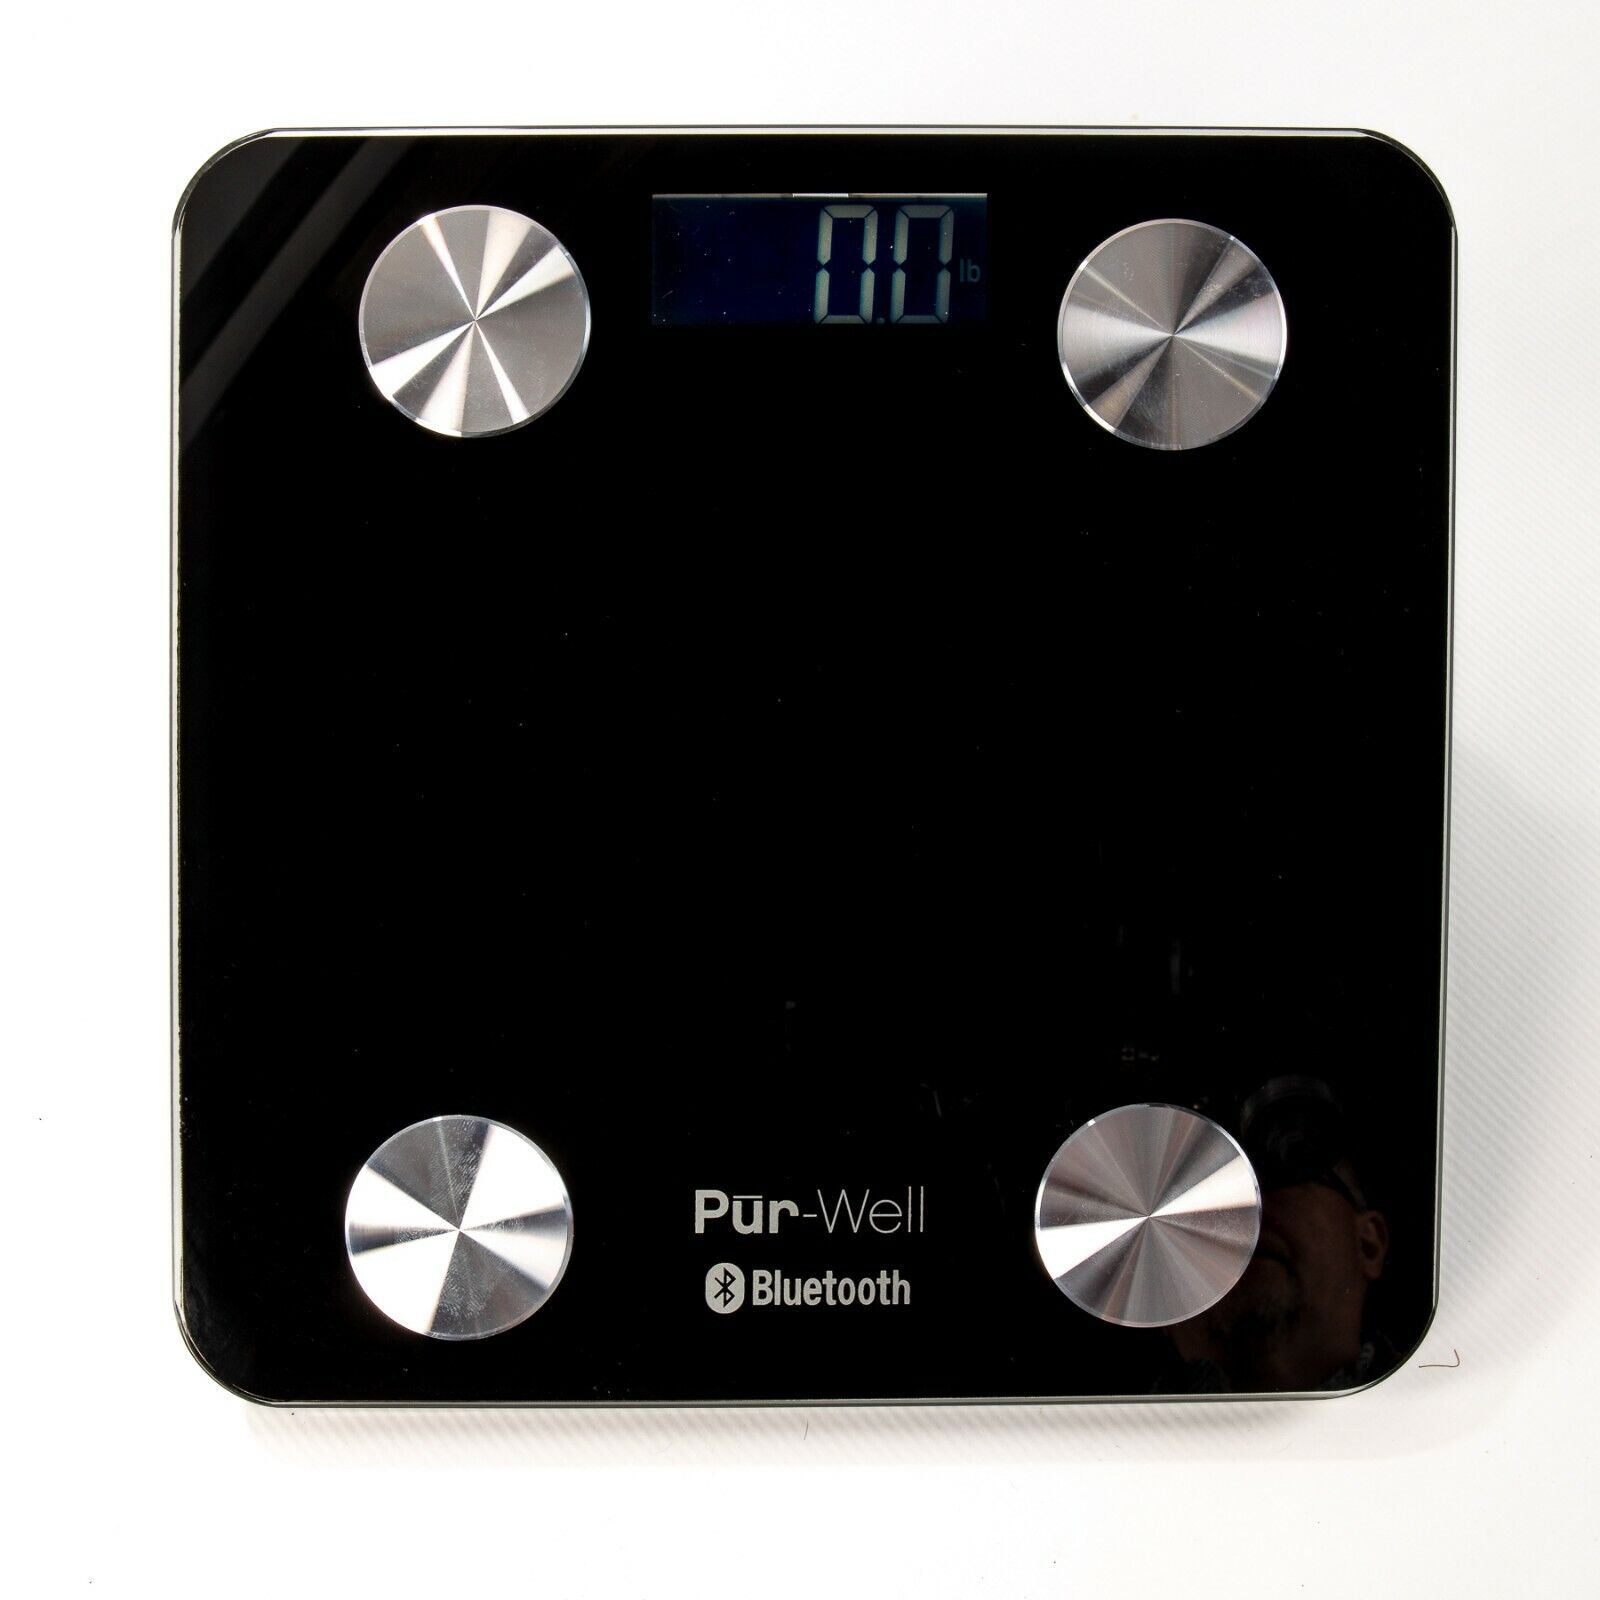 Pur-Well Living Body Fat Bluetooth Bathroom Scale Weight Loss Digital Scale